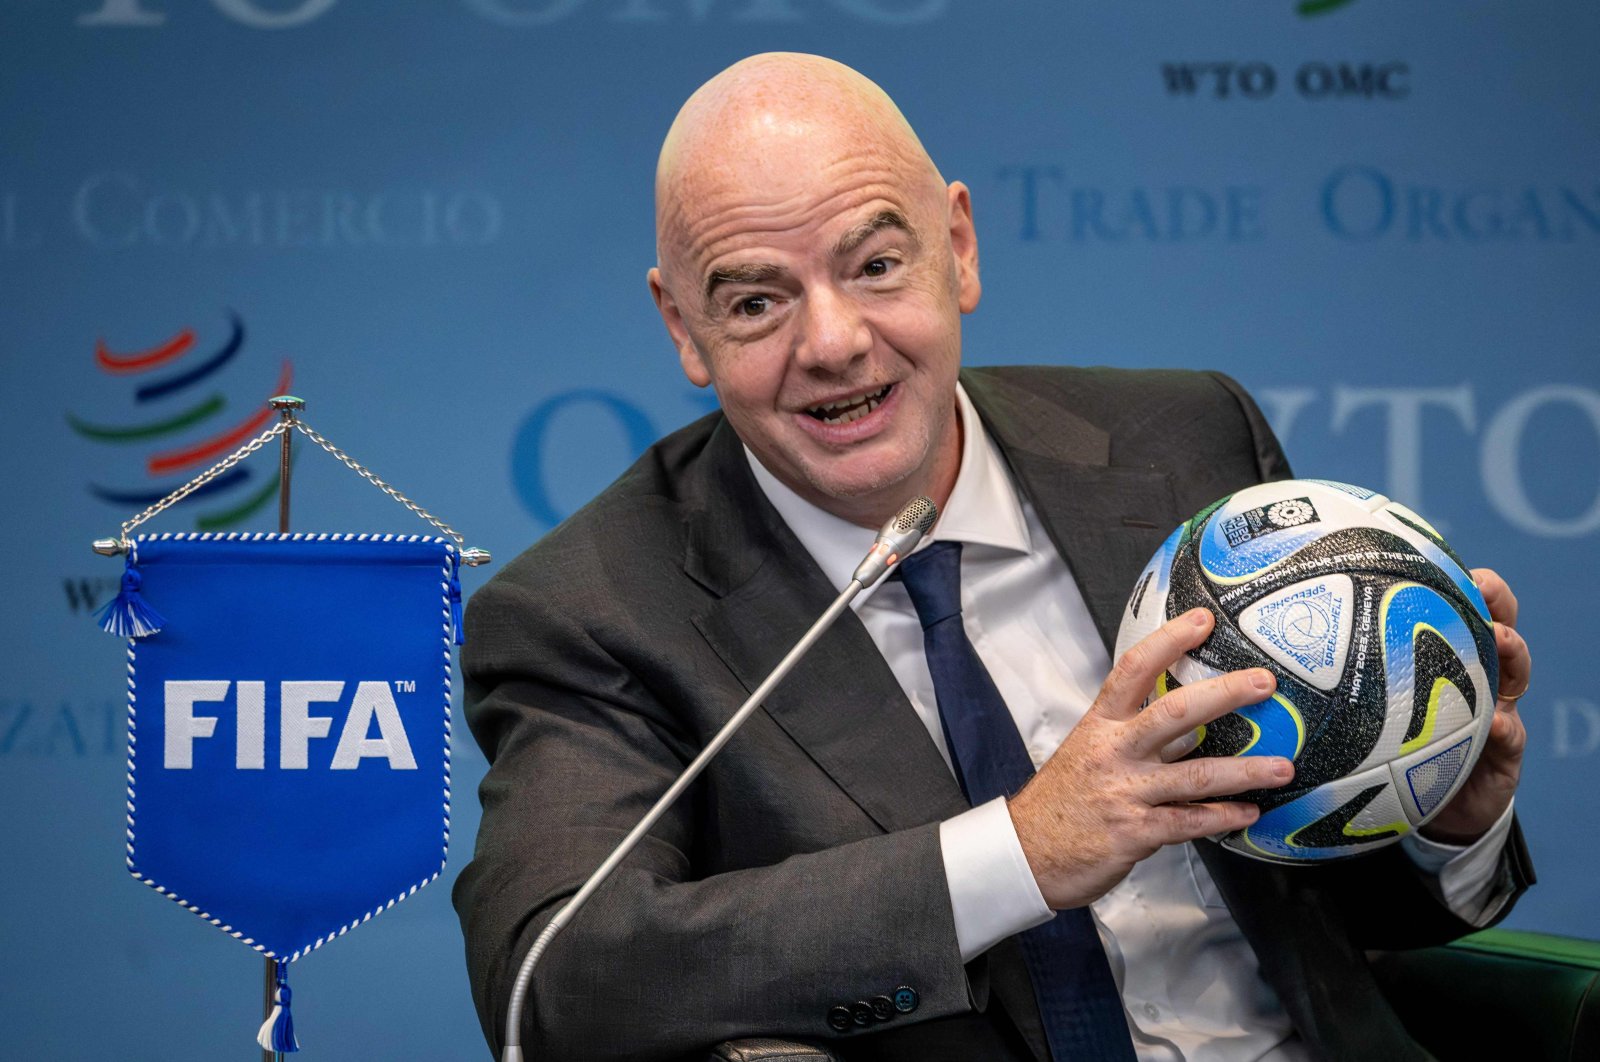 FIFA President Gianni Infantino holds an official ball of the 2023 FIFA Women&#039;s World Cup during the &quot;Making trade score for women!&quot; discussion on the use of football as a tool for trade and development at the WTO headquarters, Geneva, Switzerland, May 1, 2023. (AFP Photo)